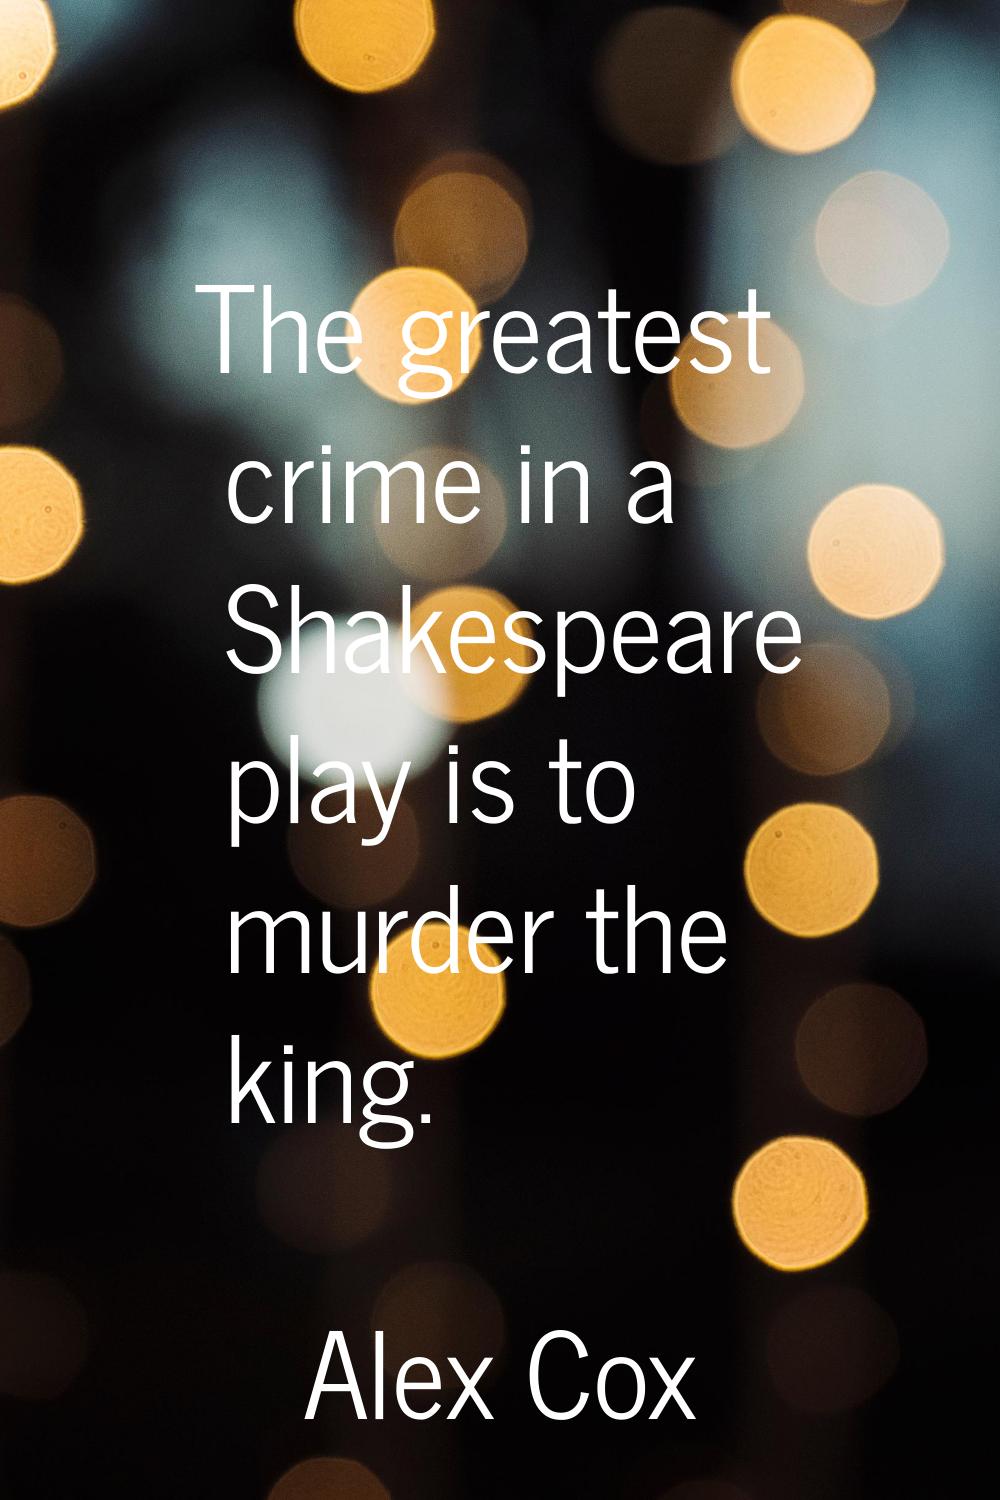 The greatest crime in a Shakespeare play is to murder the king.